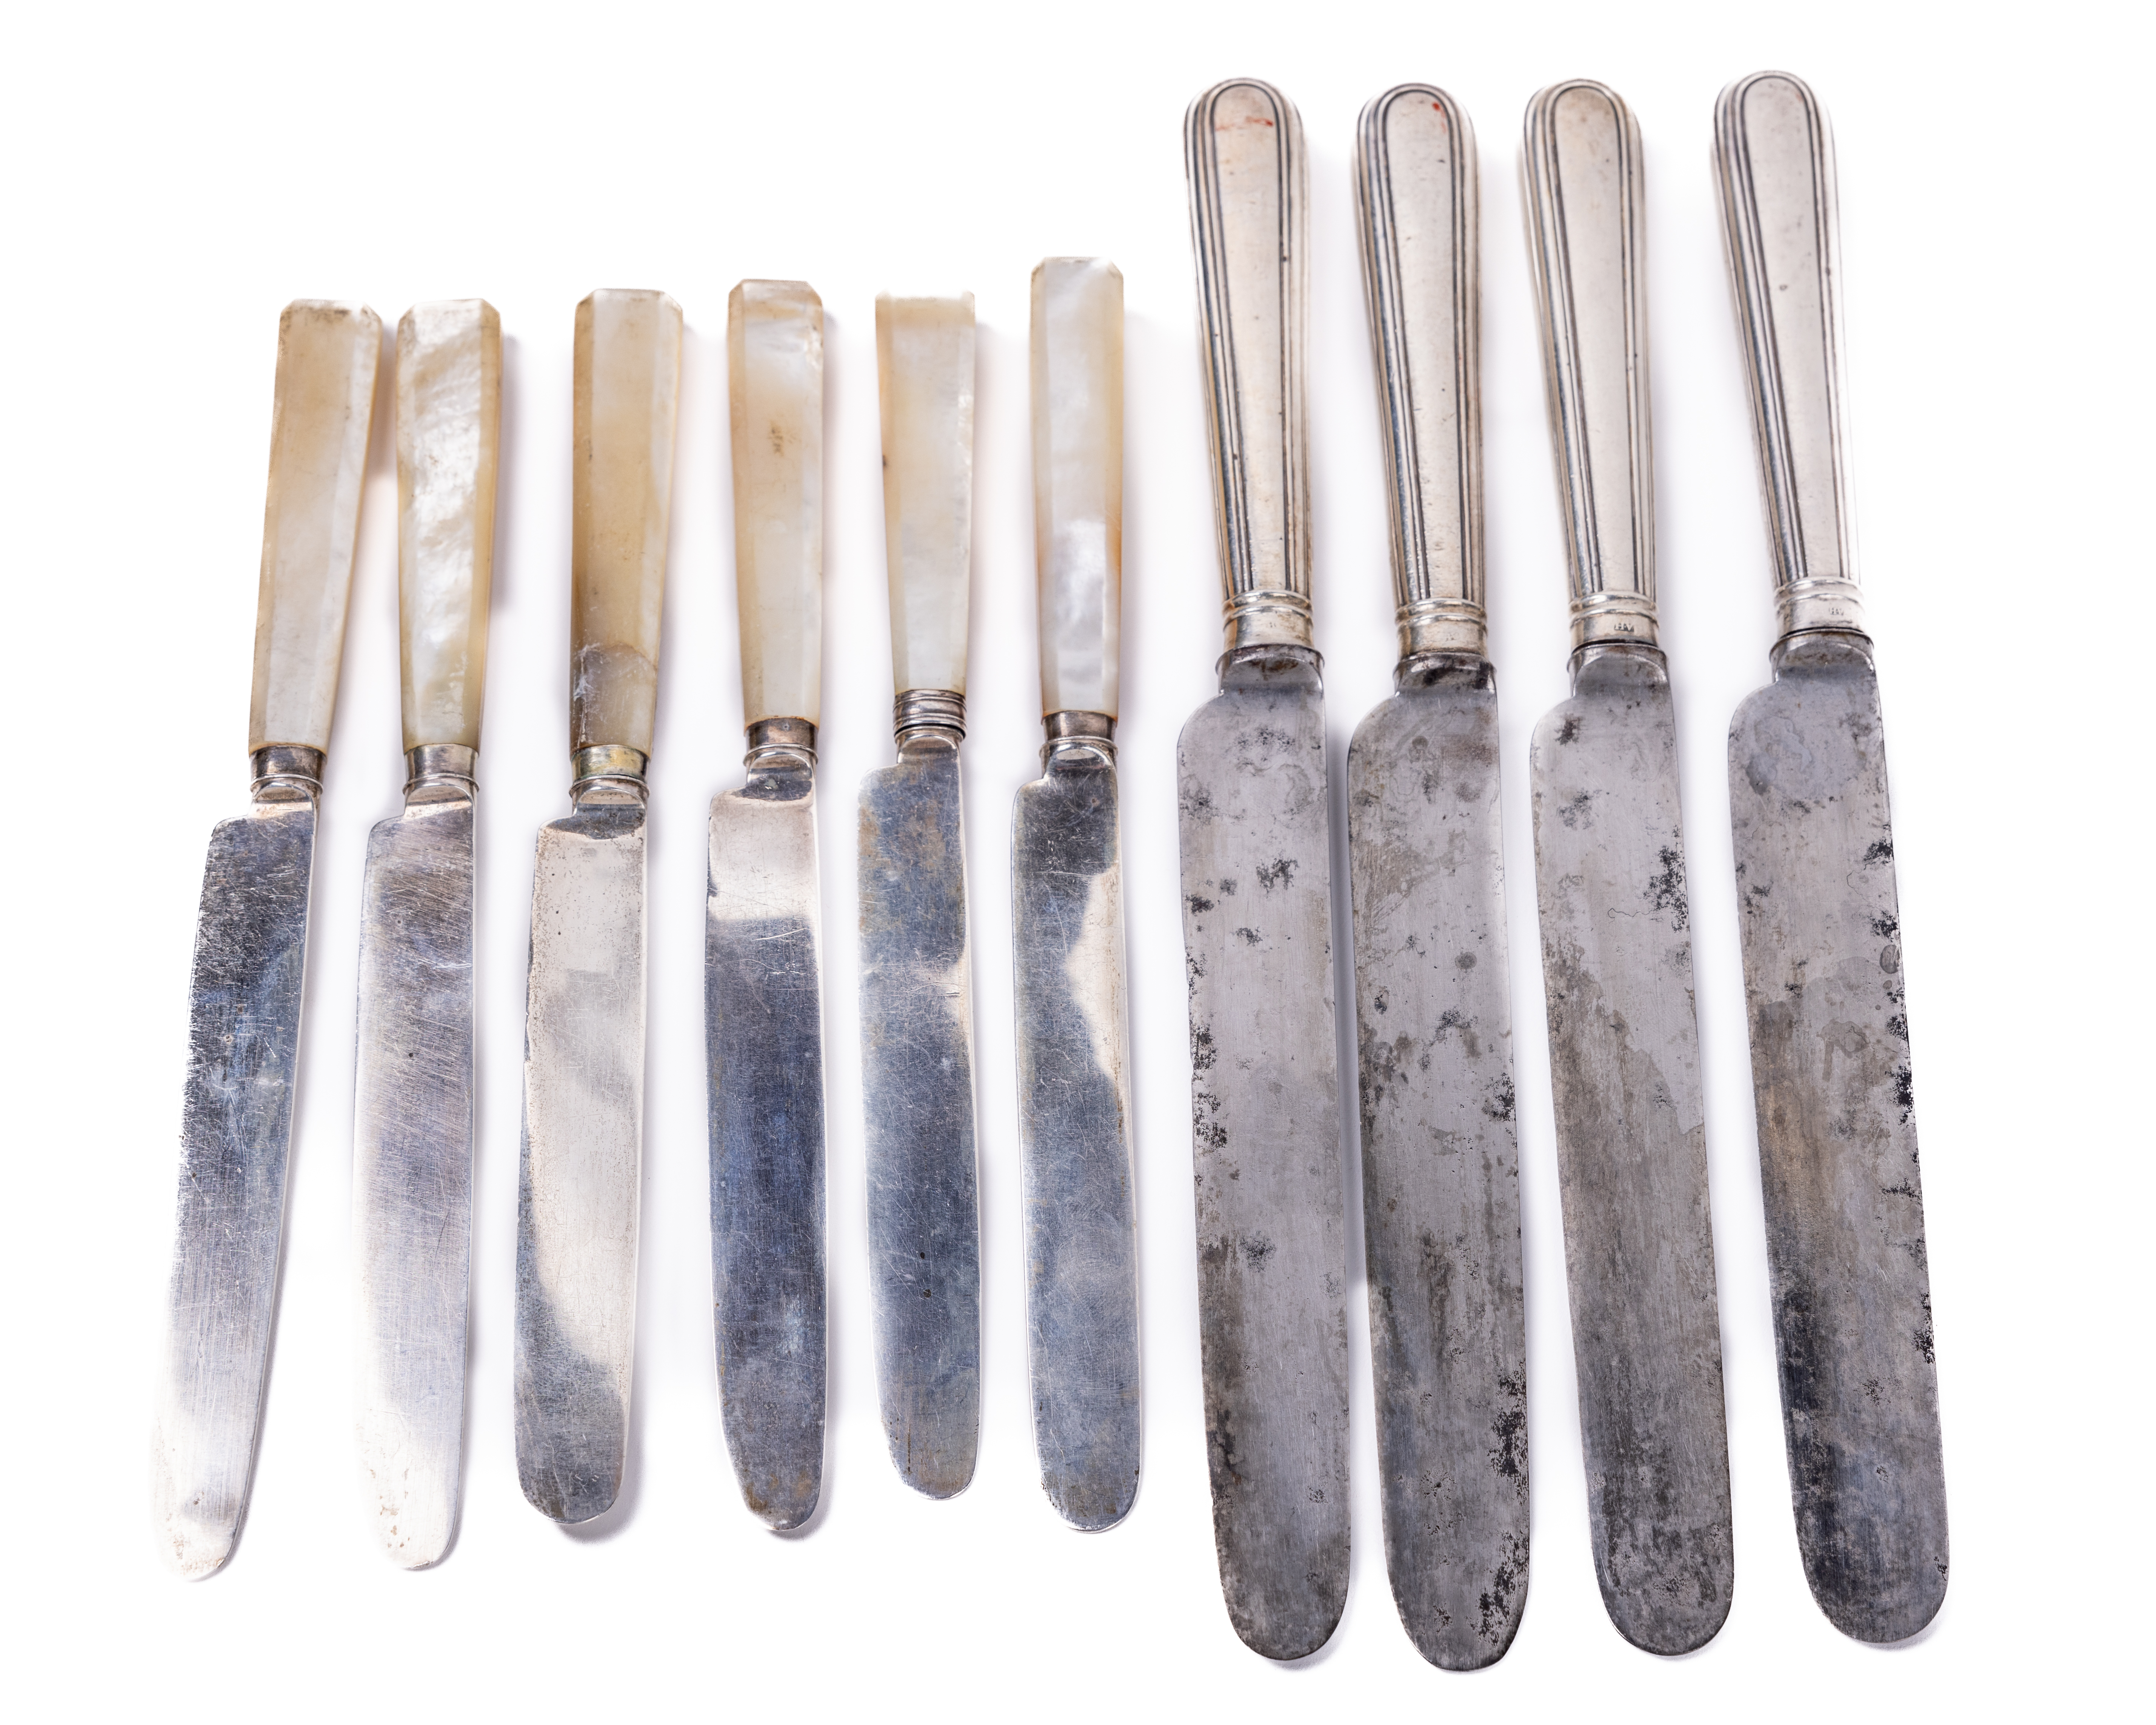 A set of four silver handled Dinner Knives, by Alexander Hewitt, London, with engraved crest of bird